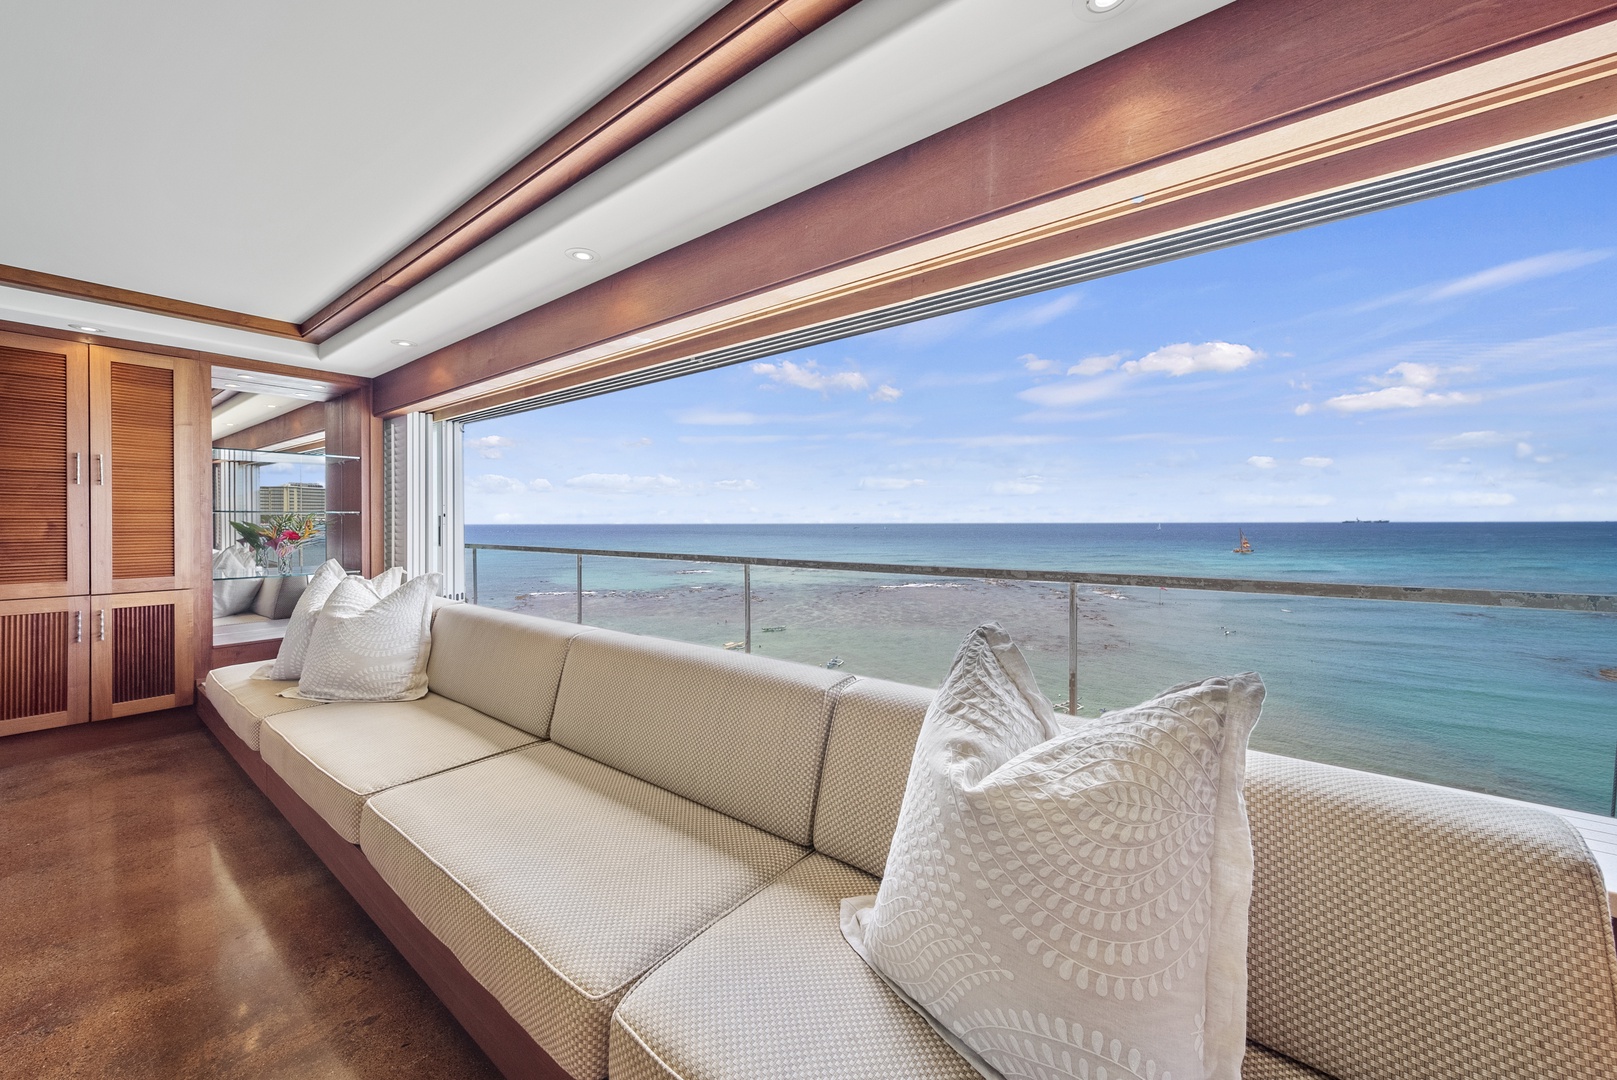 Honolulu Vacation Rentals, Diamond Head Sunset - Stunning ocean views from the comfort of your abode